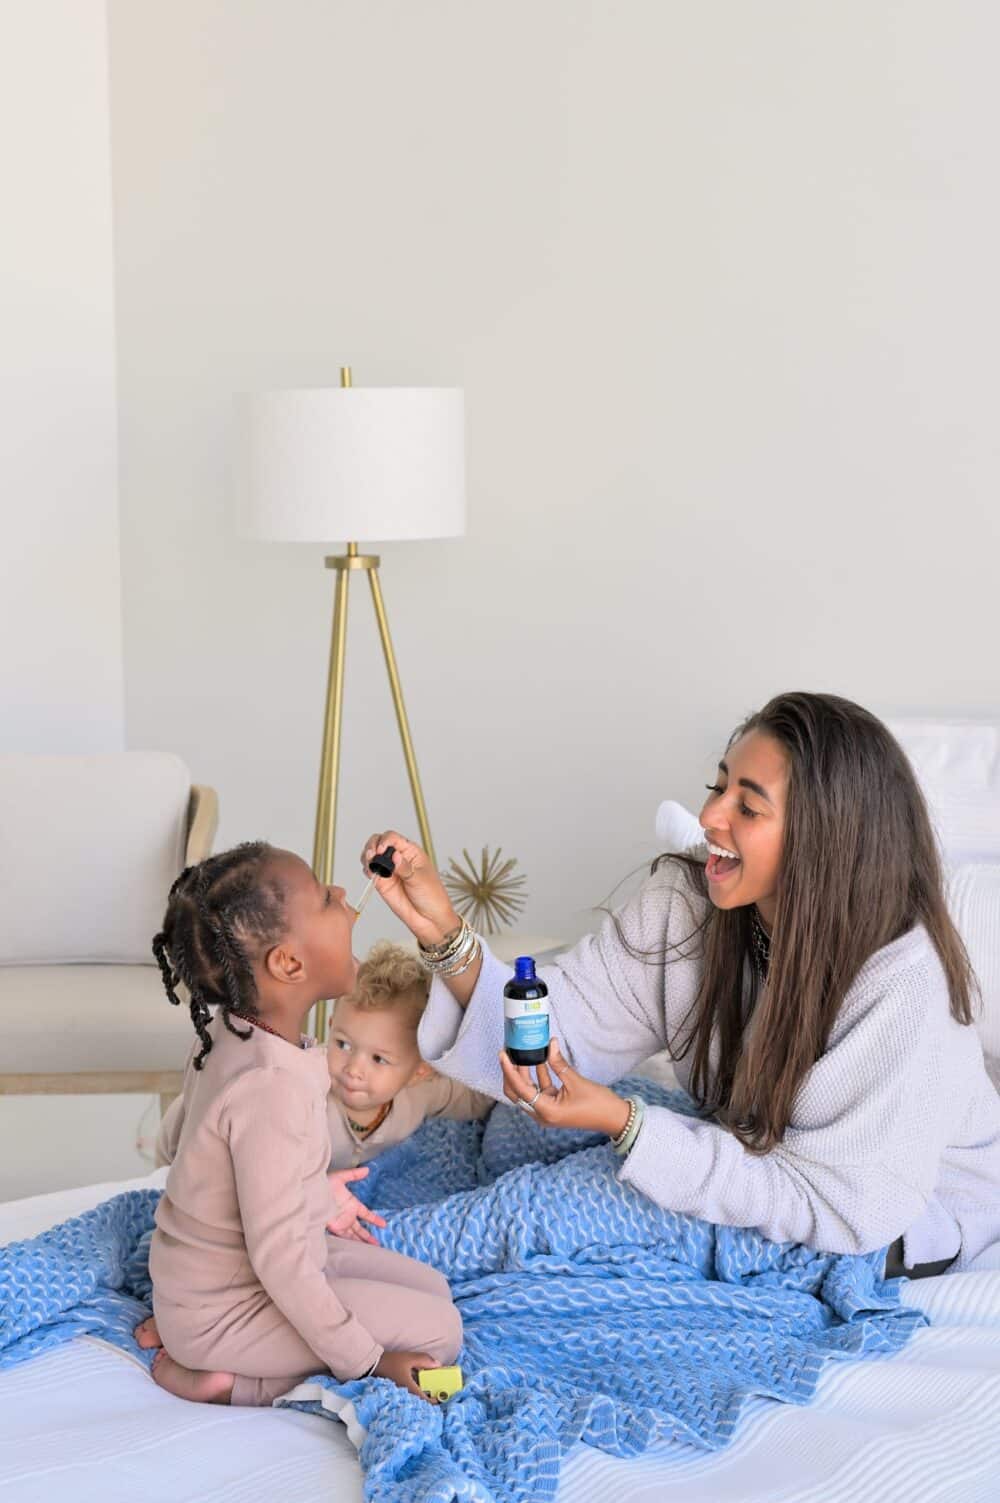 Image of Britney Ross administering a dose of Genesis Blend Extra Strength hemp CBD oil to her daughters.